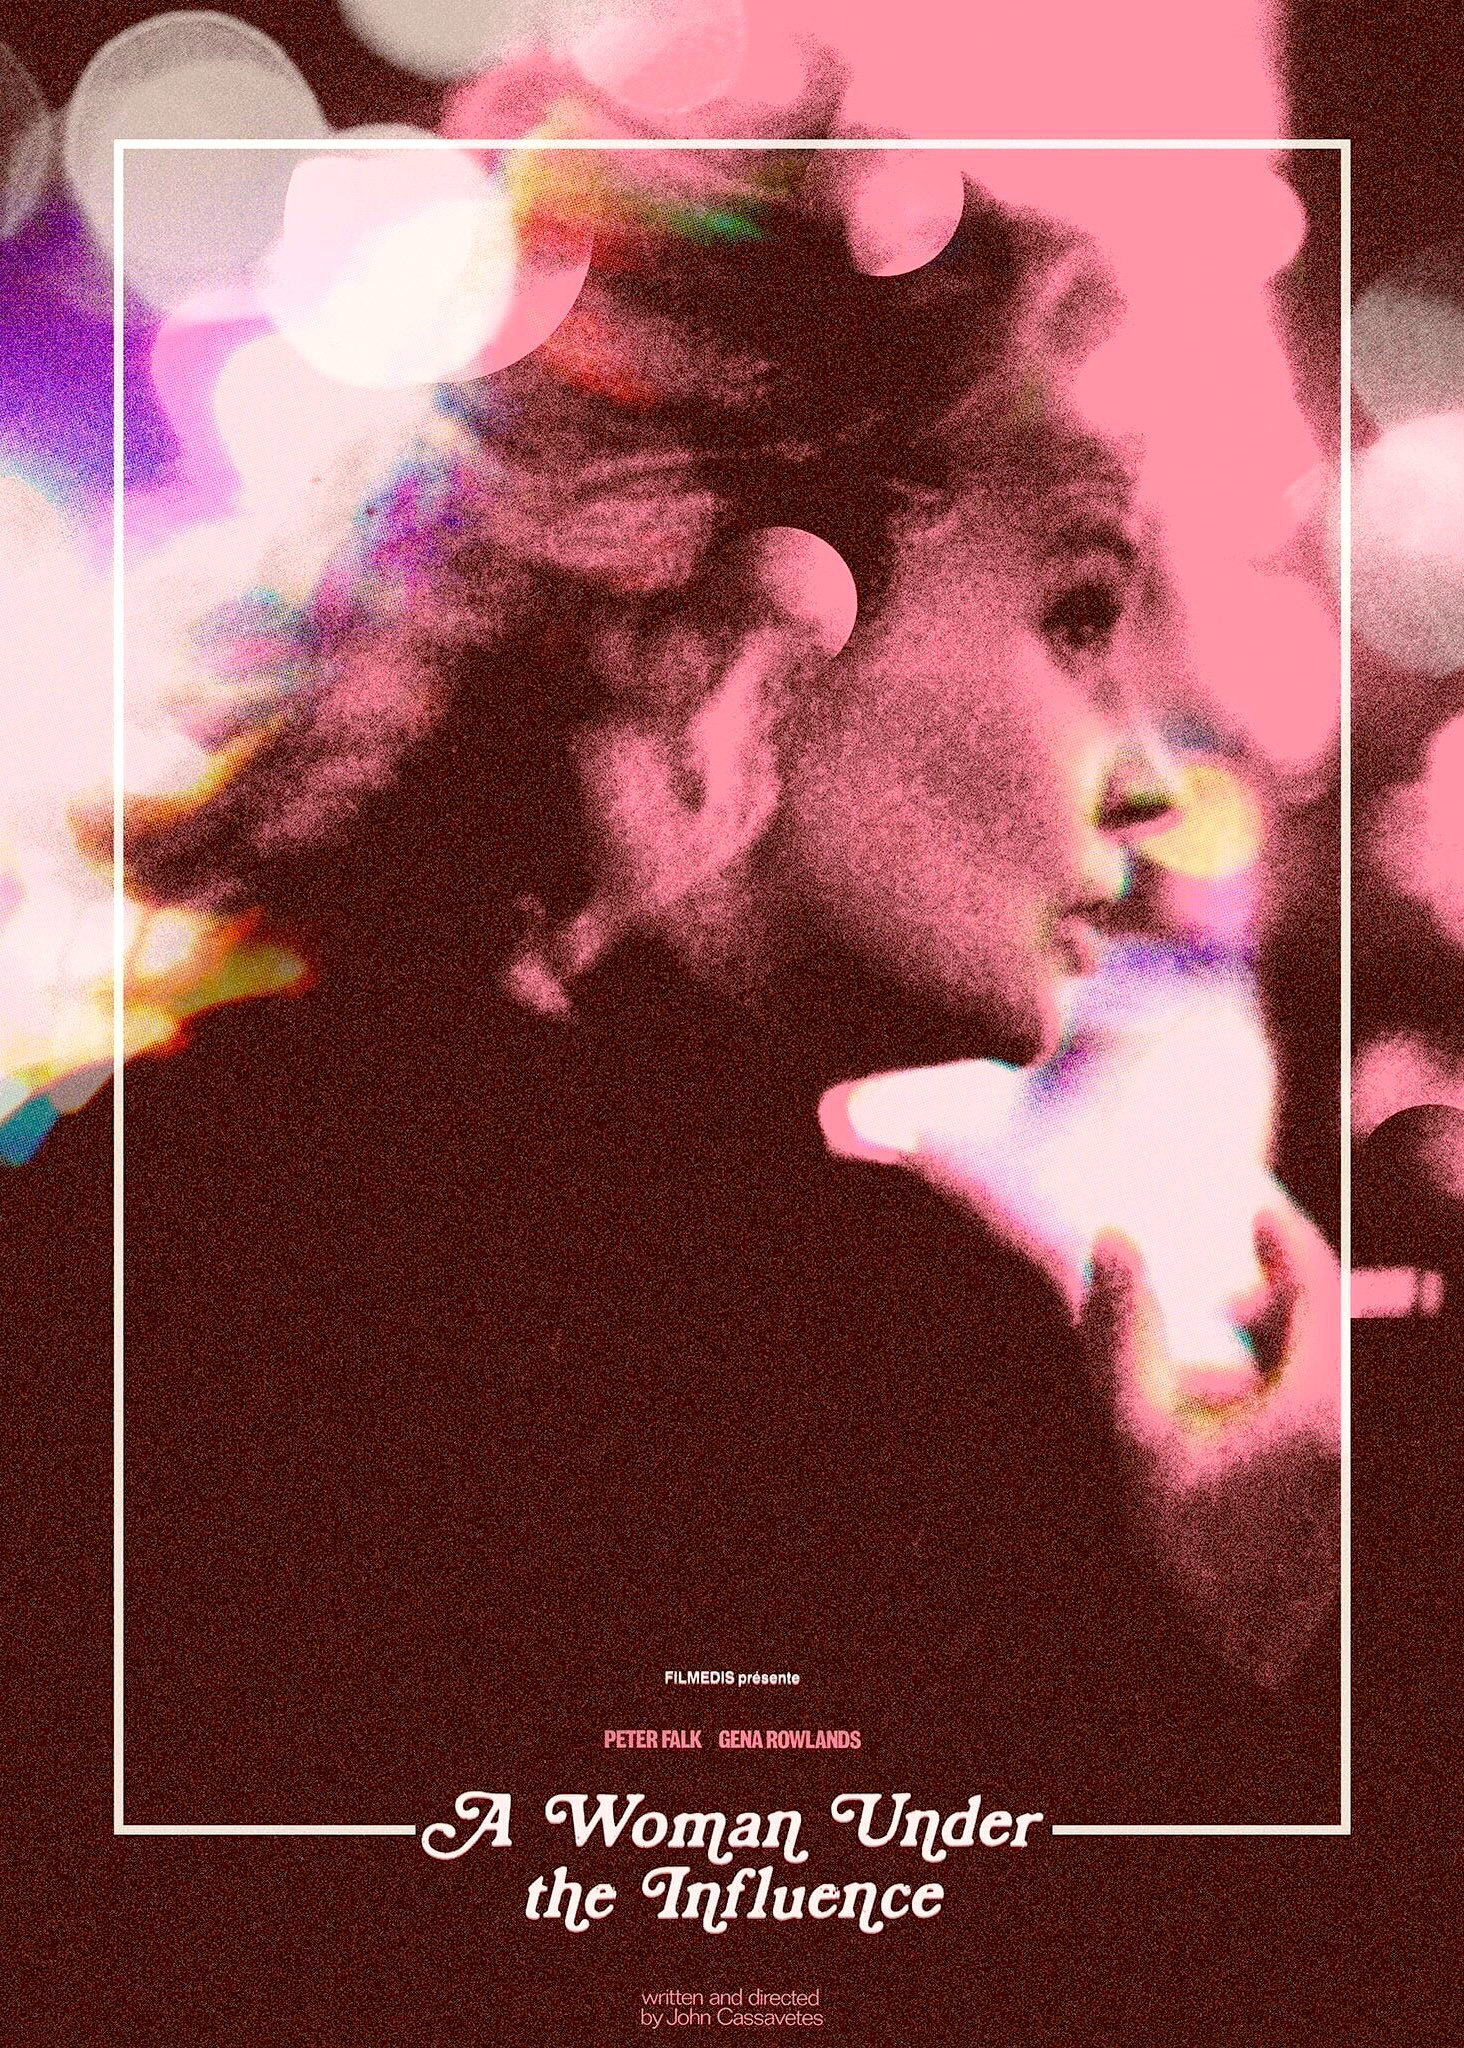 The Plaza Theatre on X: TONIGHT AT 8:45 PM! See Gena Rowlands in one of the  greatest performances in cinema history as Mabel in John Cassavetes' A  WOMAN UNDER THE INFLUENCE. Link